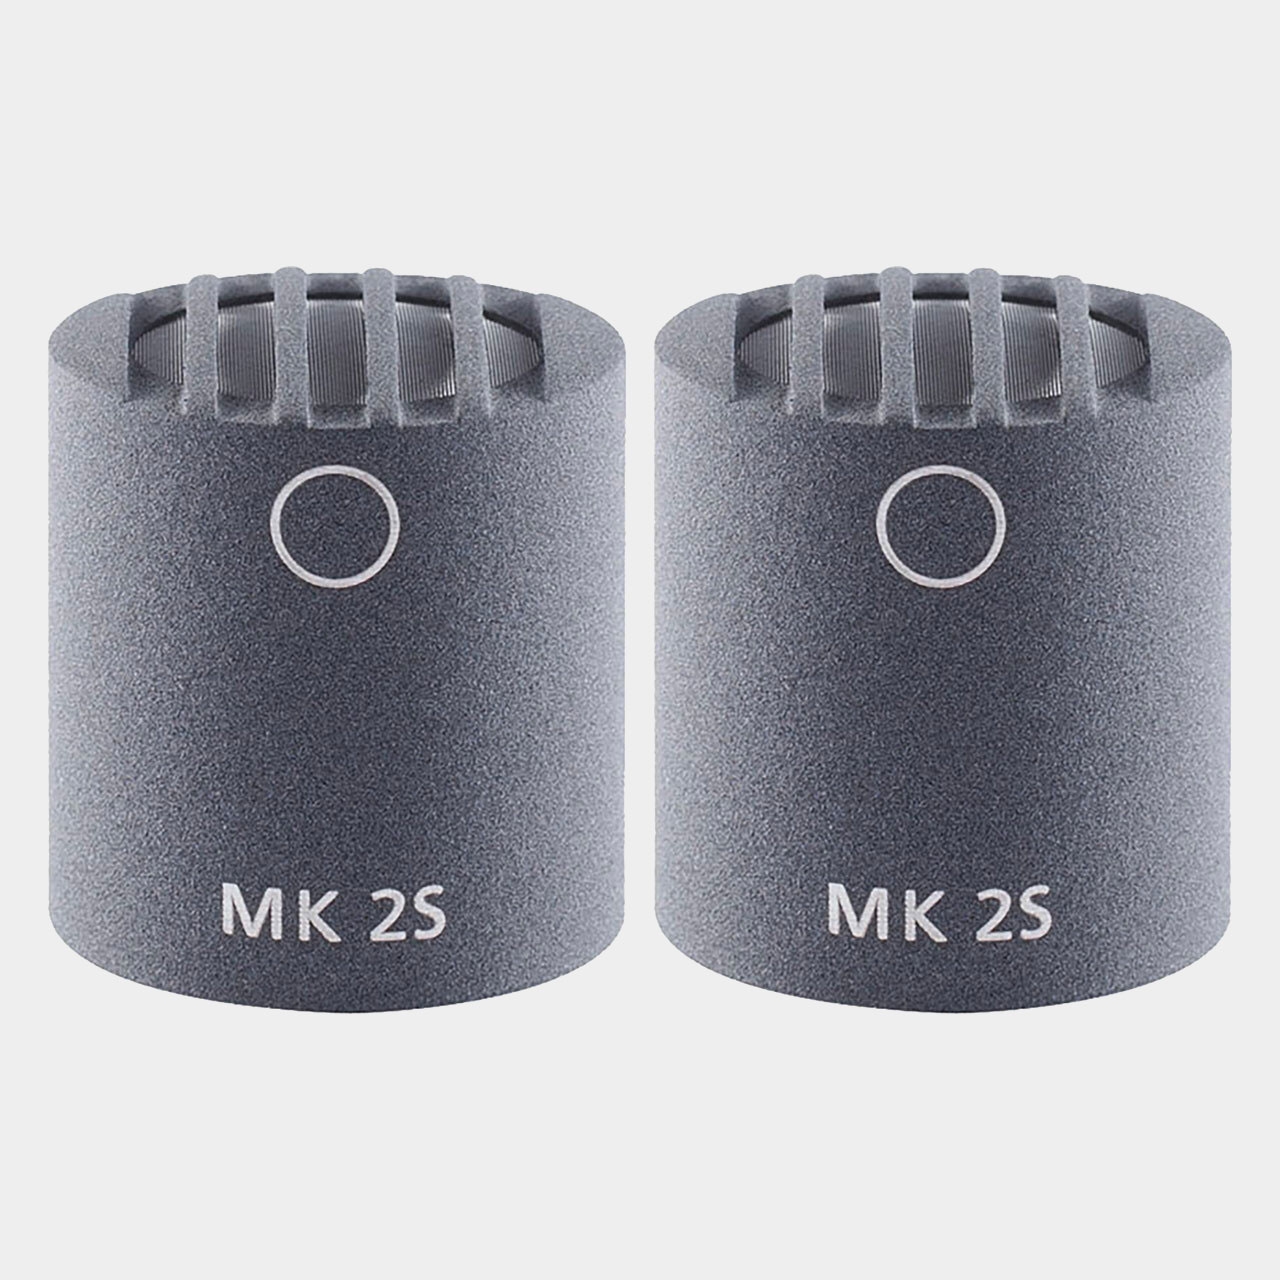 Schoeps MK 2S Omni Capsules (Matched Pair)